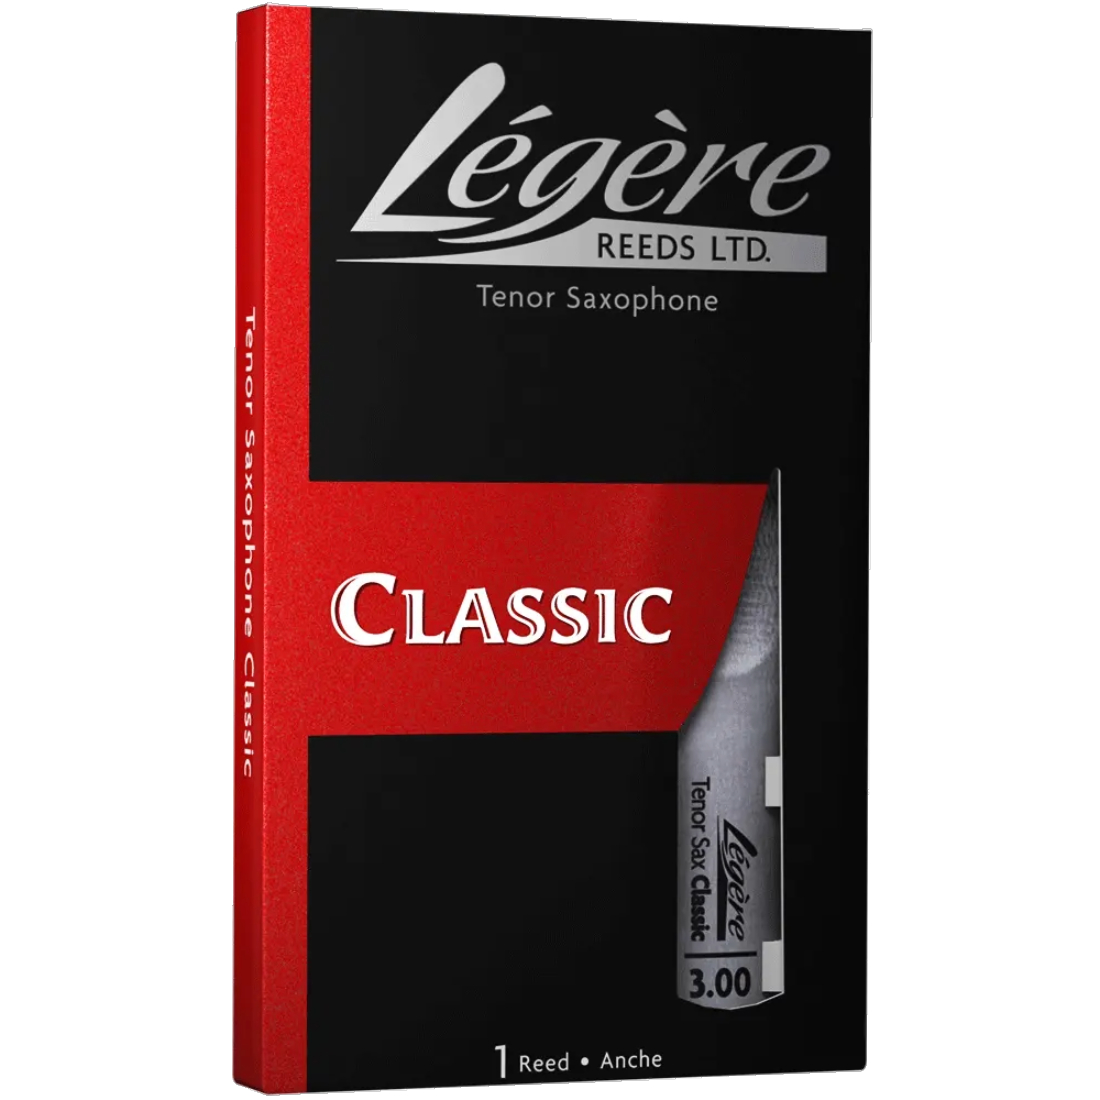 Black and red box of classic Legere synthetic tenor saxophone reeds